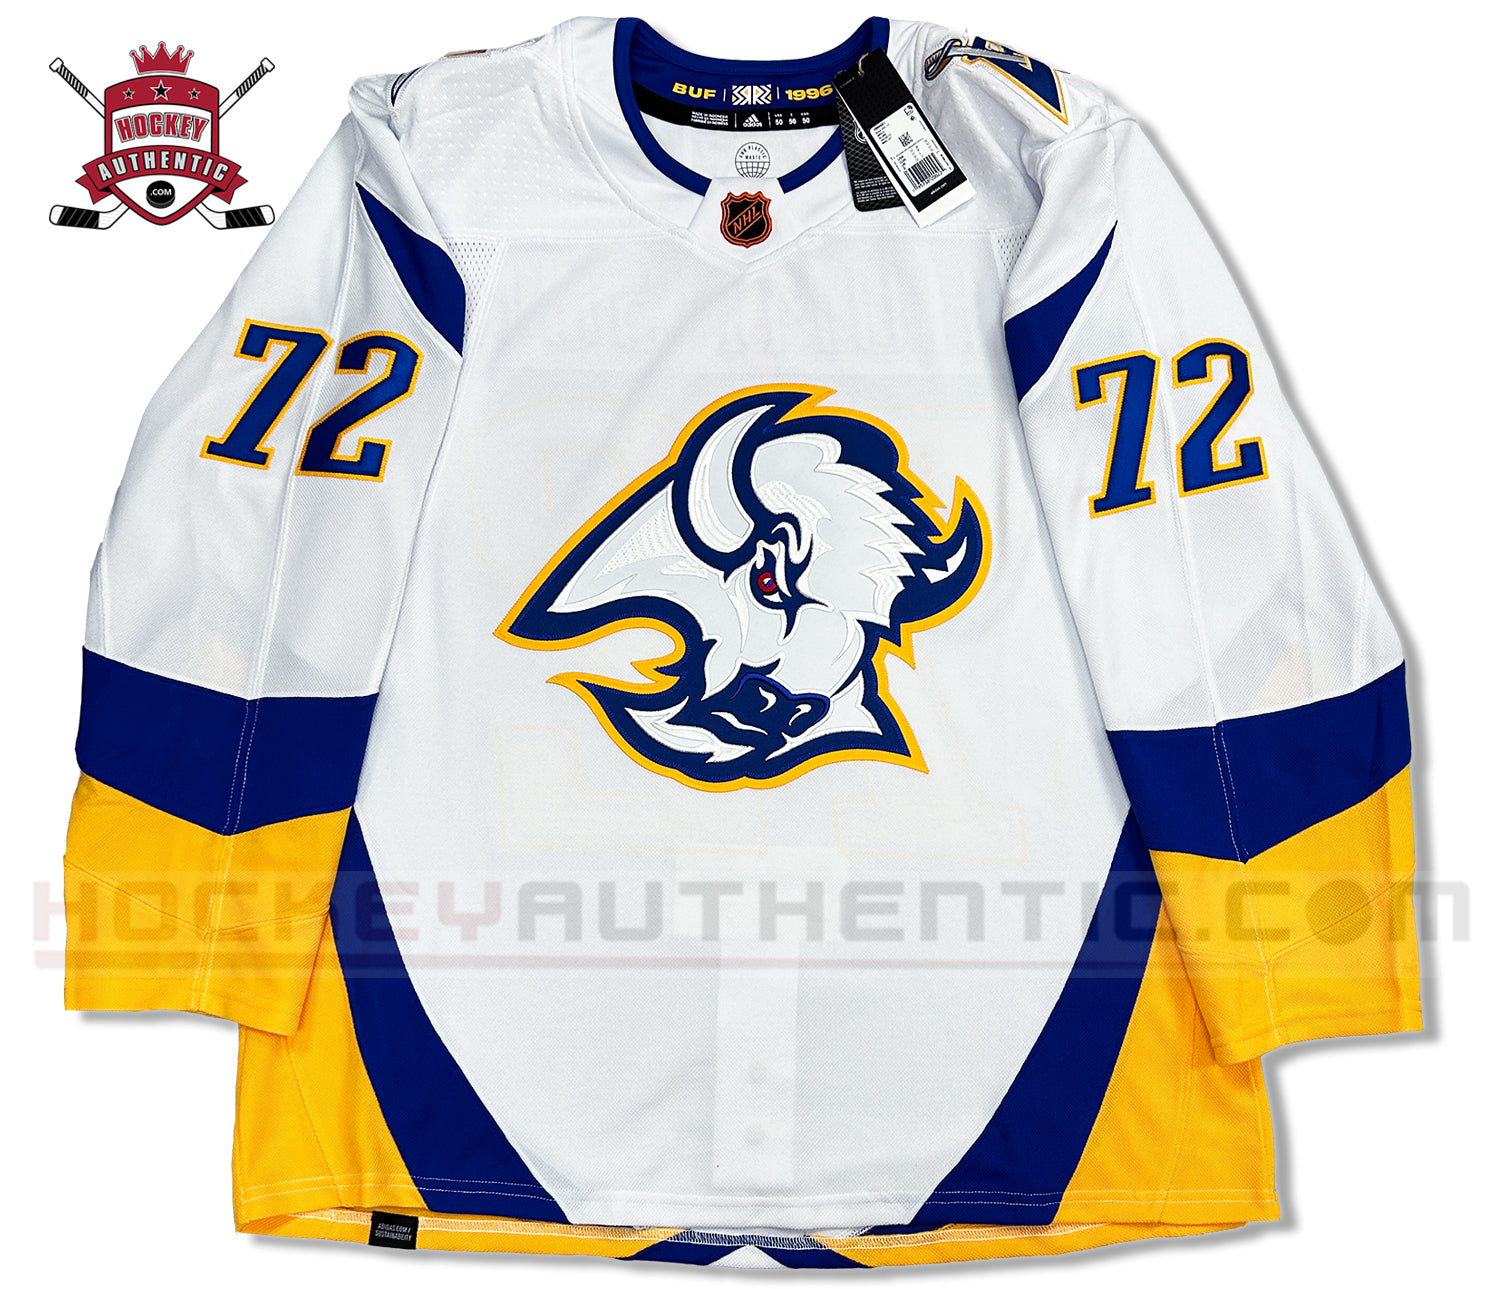 Buffalo Sabres on X: Oh yeah, we're diggin' it. #ReverseRetro